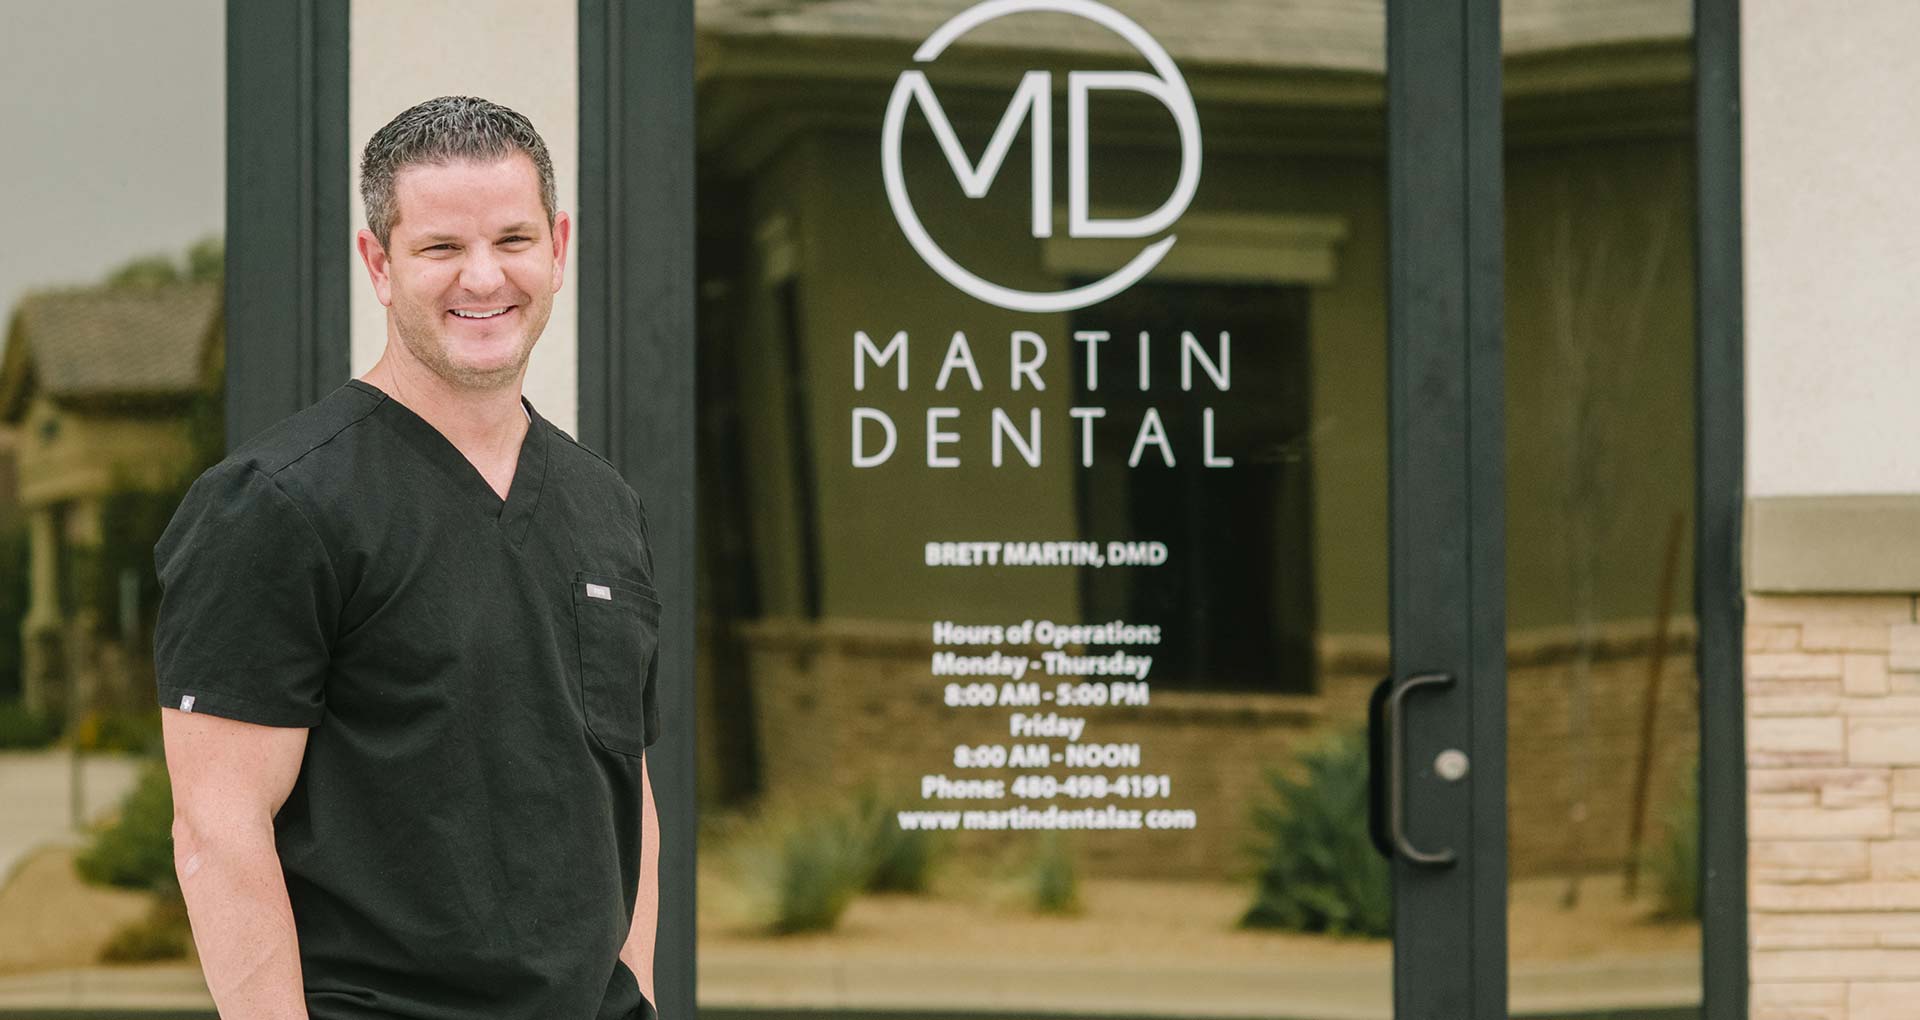 Schedule an Appointment with Martin Dental in Chandler, AZ